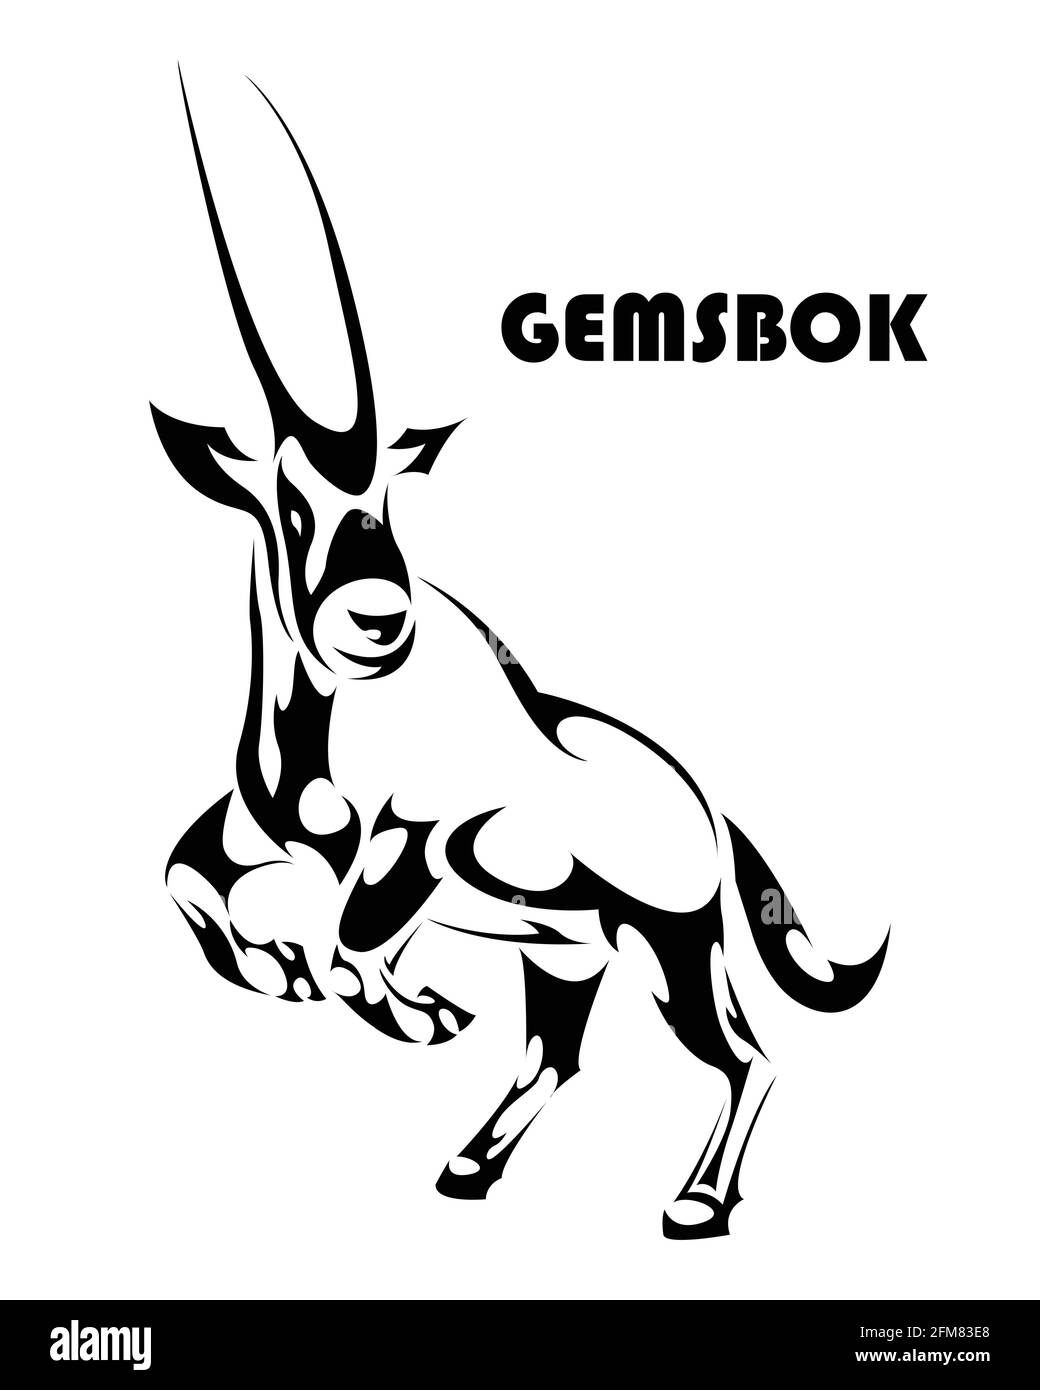 Vector illustration of a gemsbok raising two front legs to prepare to run. It looks strong and powerful. Suitable for use in logos or decorations. Stock Vector